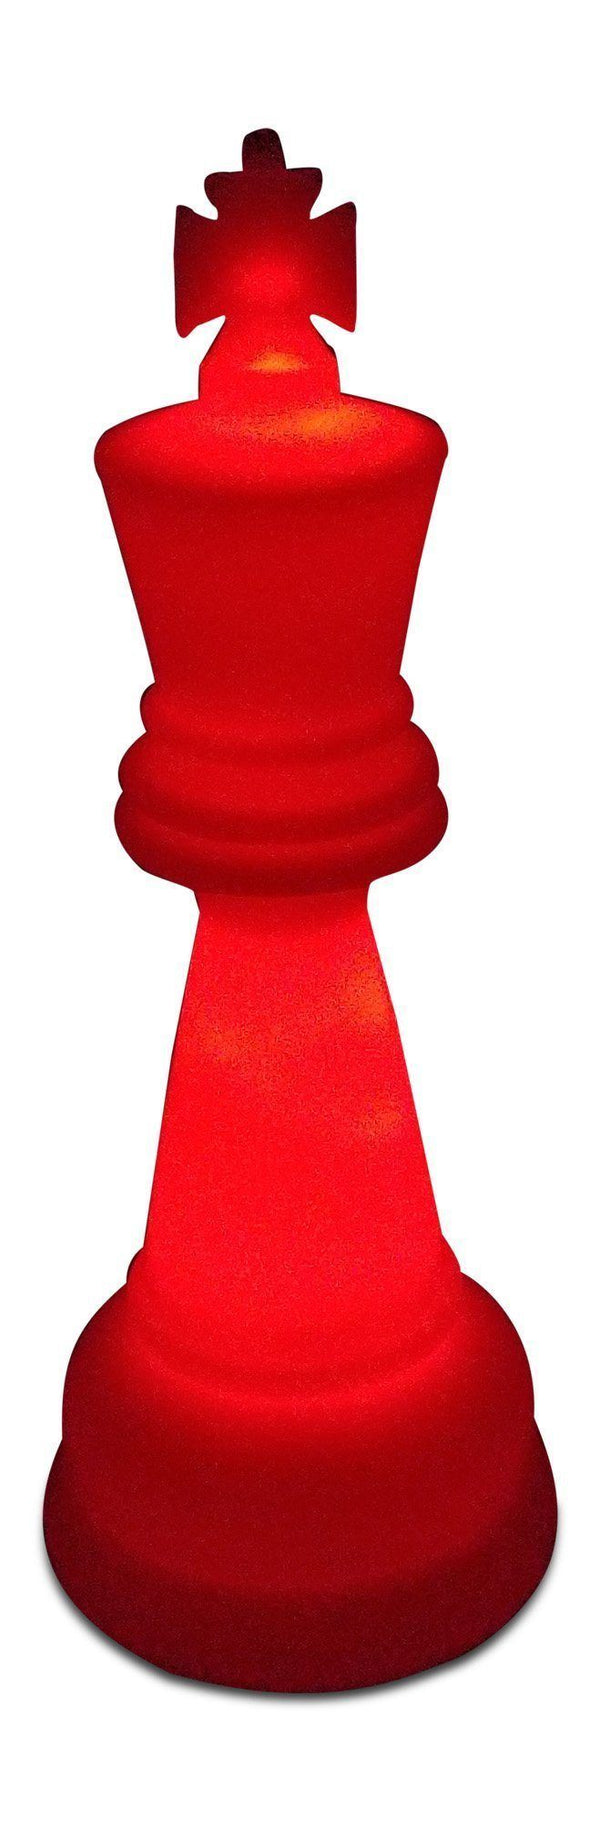 MegaChess 26 Inch Premium Plastic King Light-Up Giant Chess Piece - Red |  | GiantChessUSA